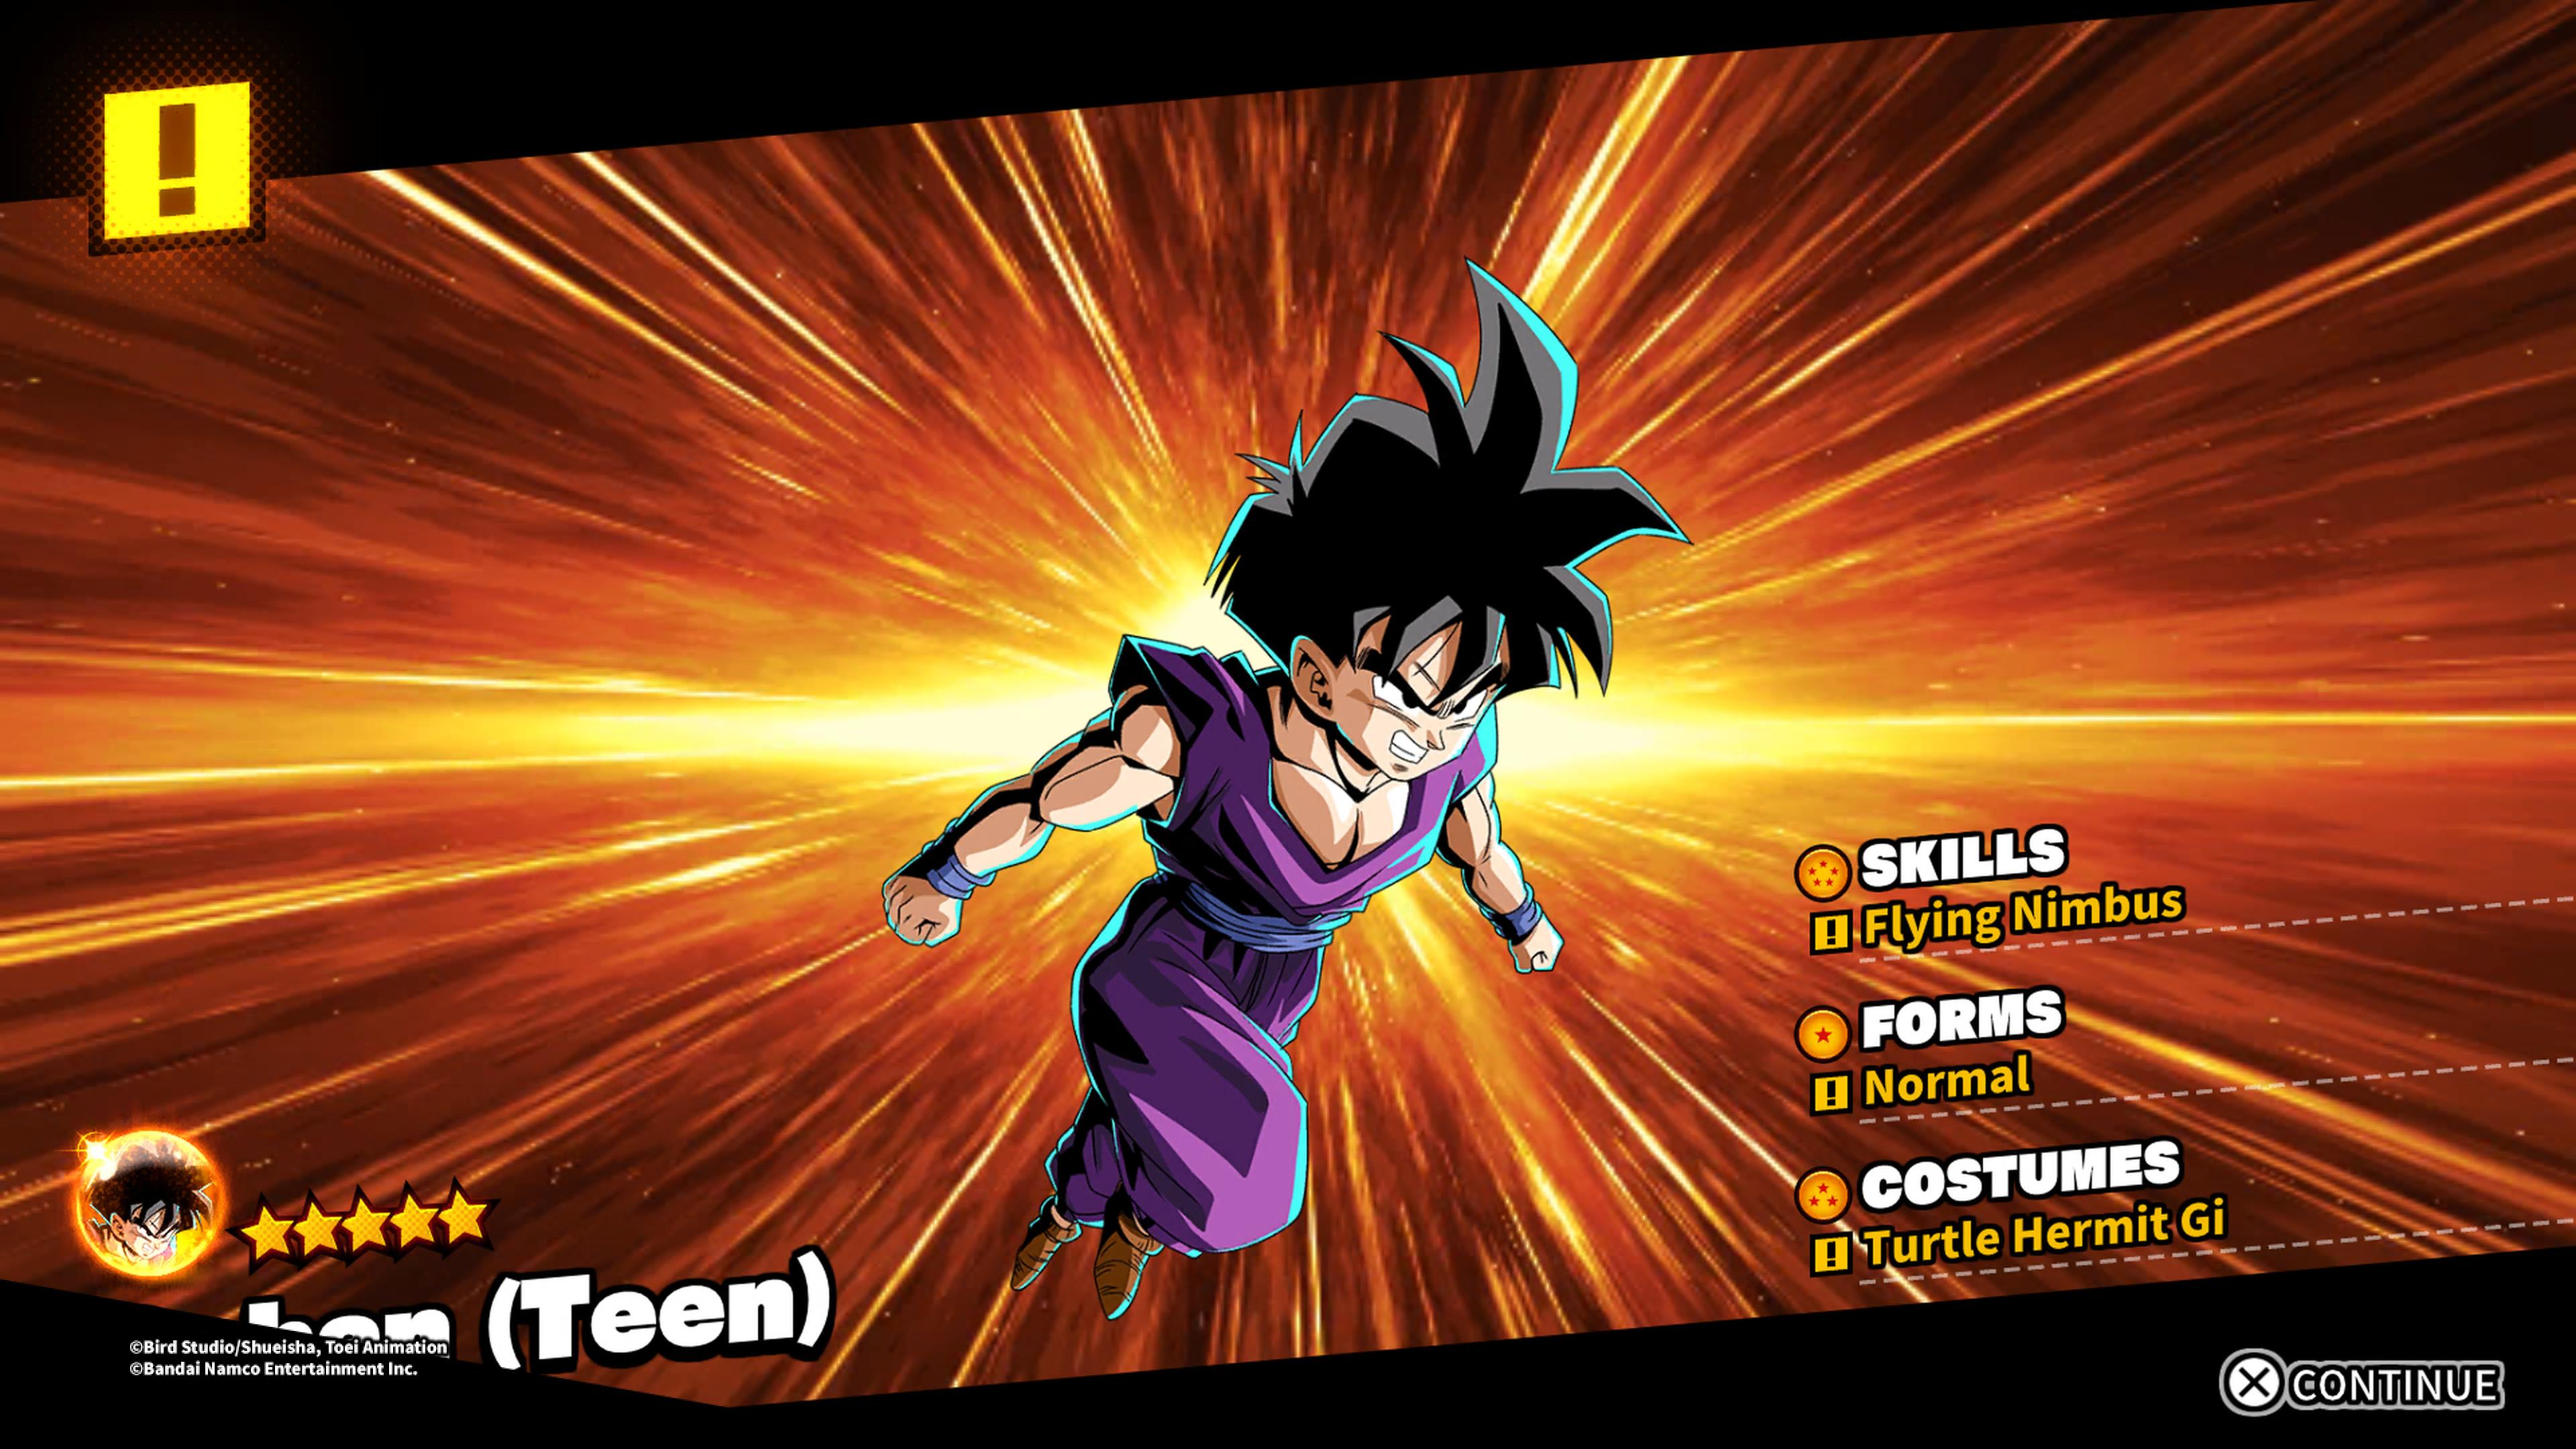 Check out DRAGON BALL: THE BREAKERS CNT guide!